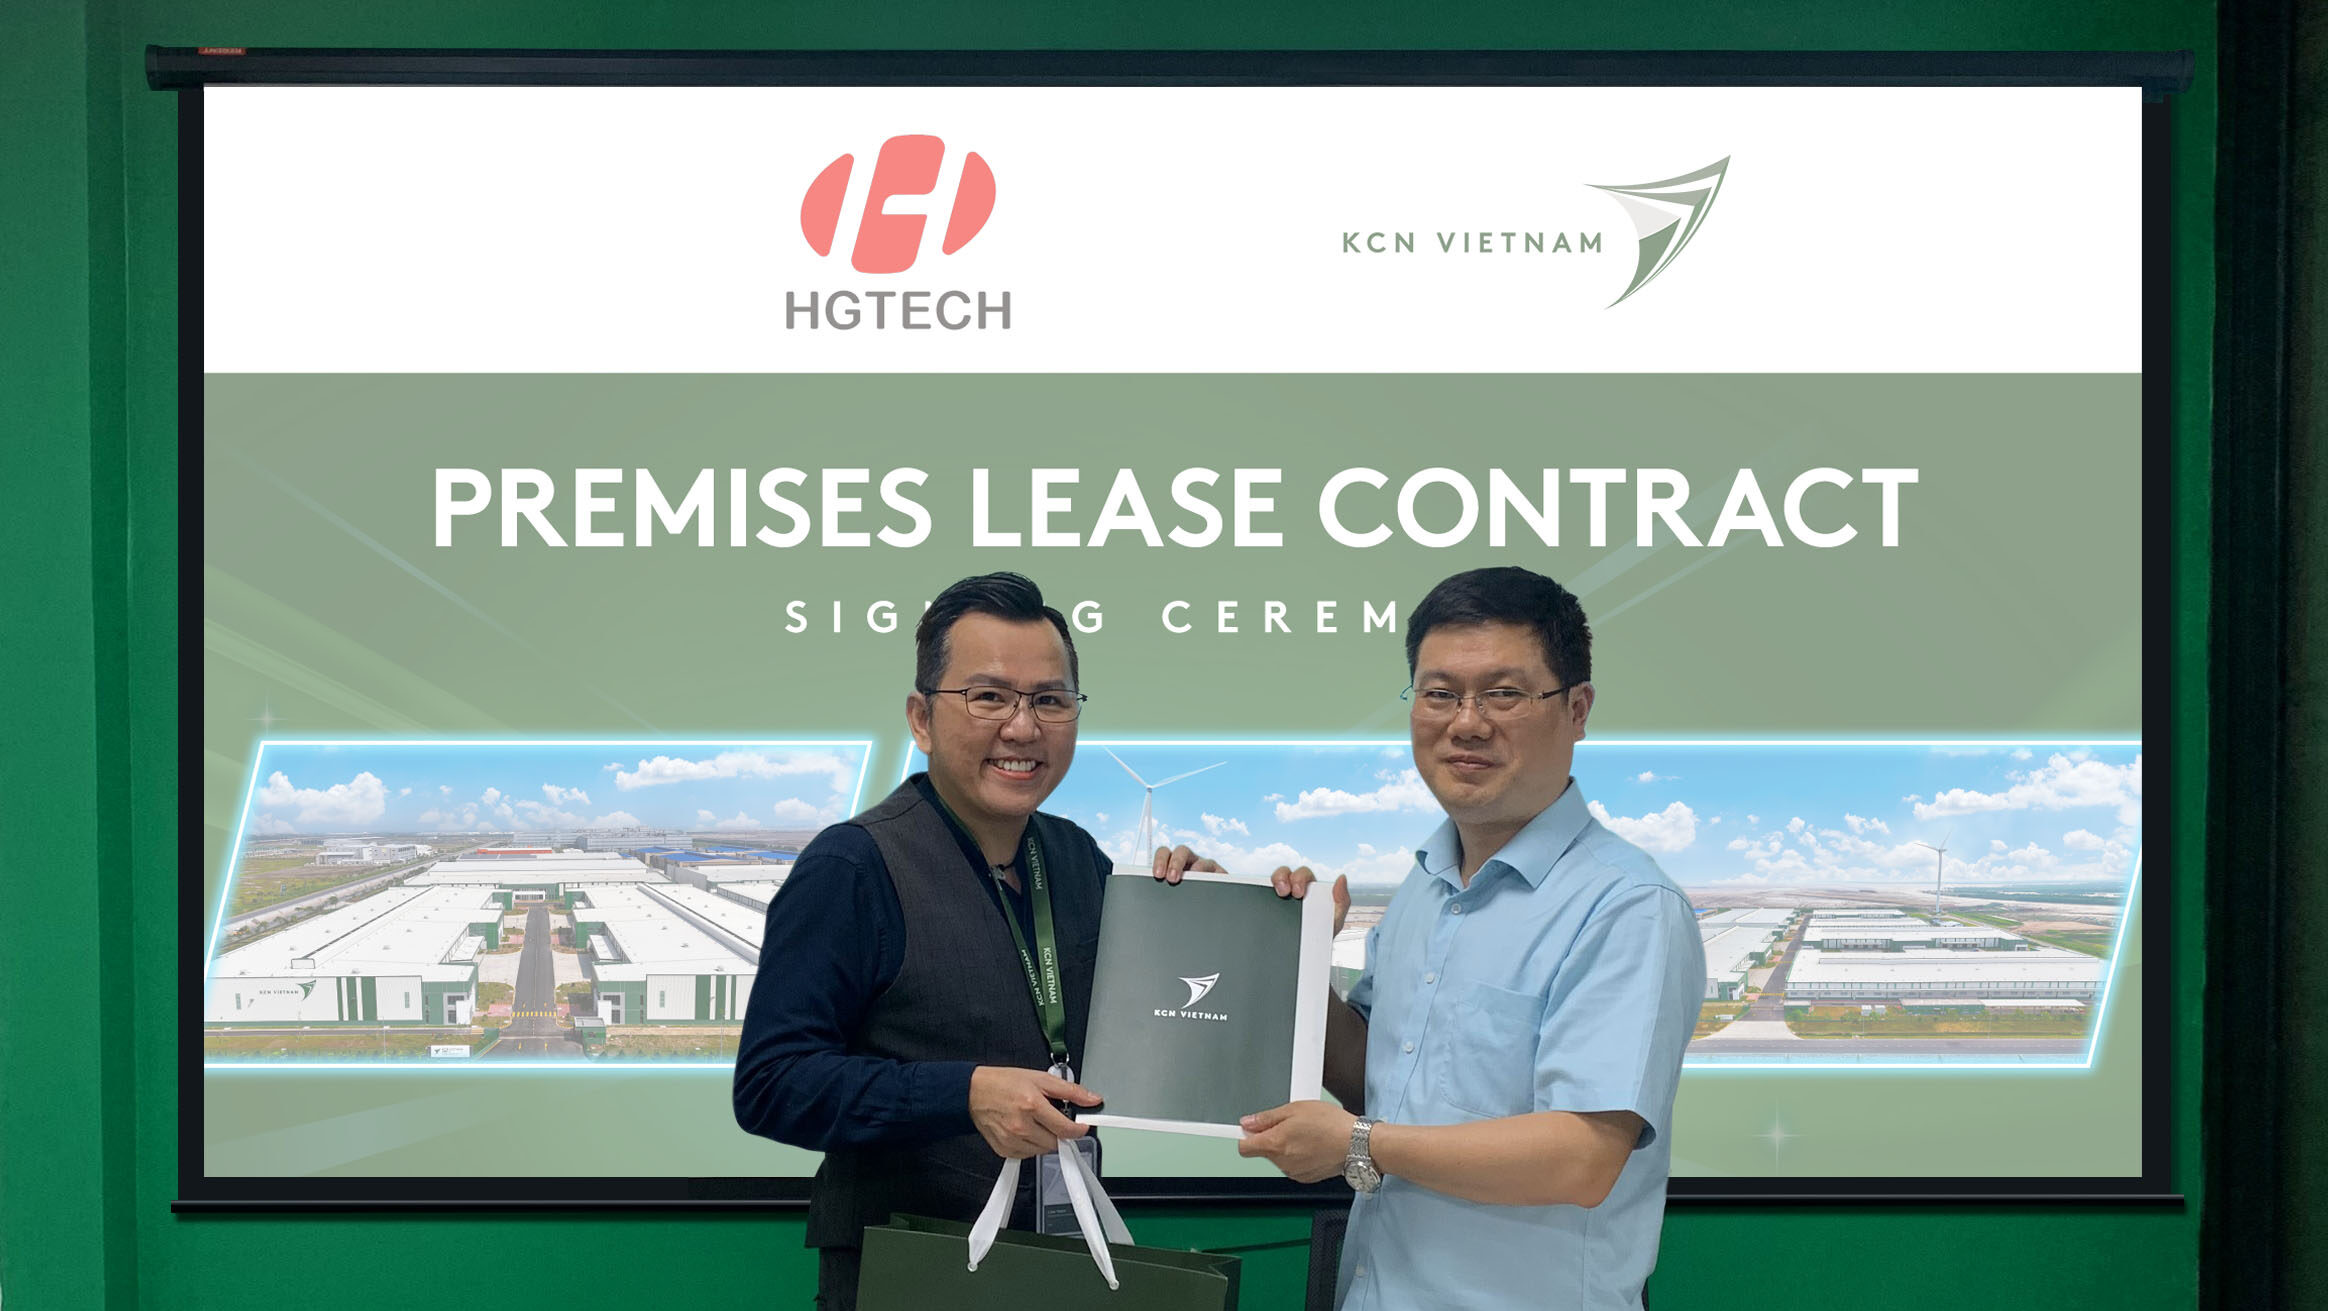 ANOTHER SUCCESSFUL DEAL AT KCN DEEP C – HAIPHONG: PLC SIGNING BETWEEN HGLASER AND KCN VIETNAM